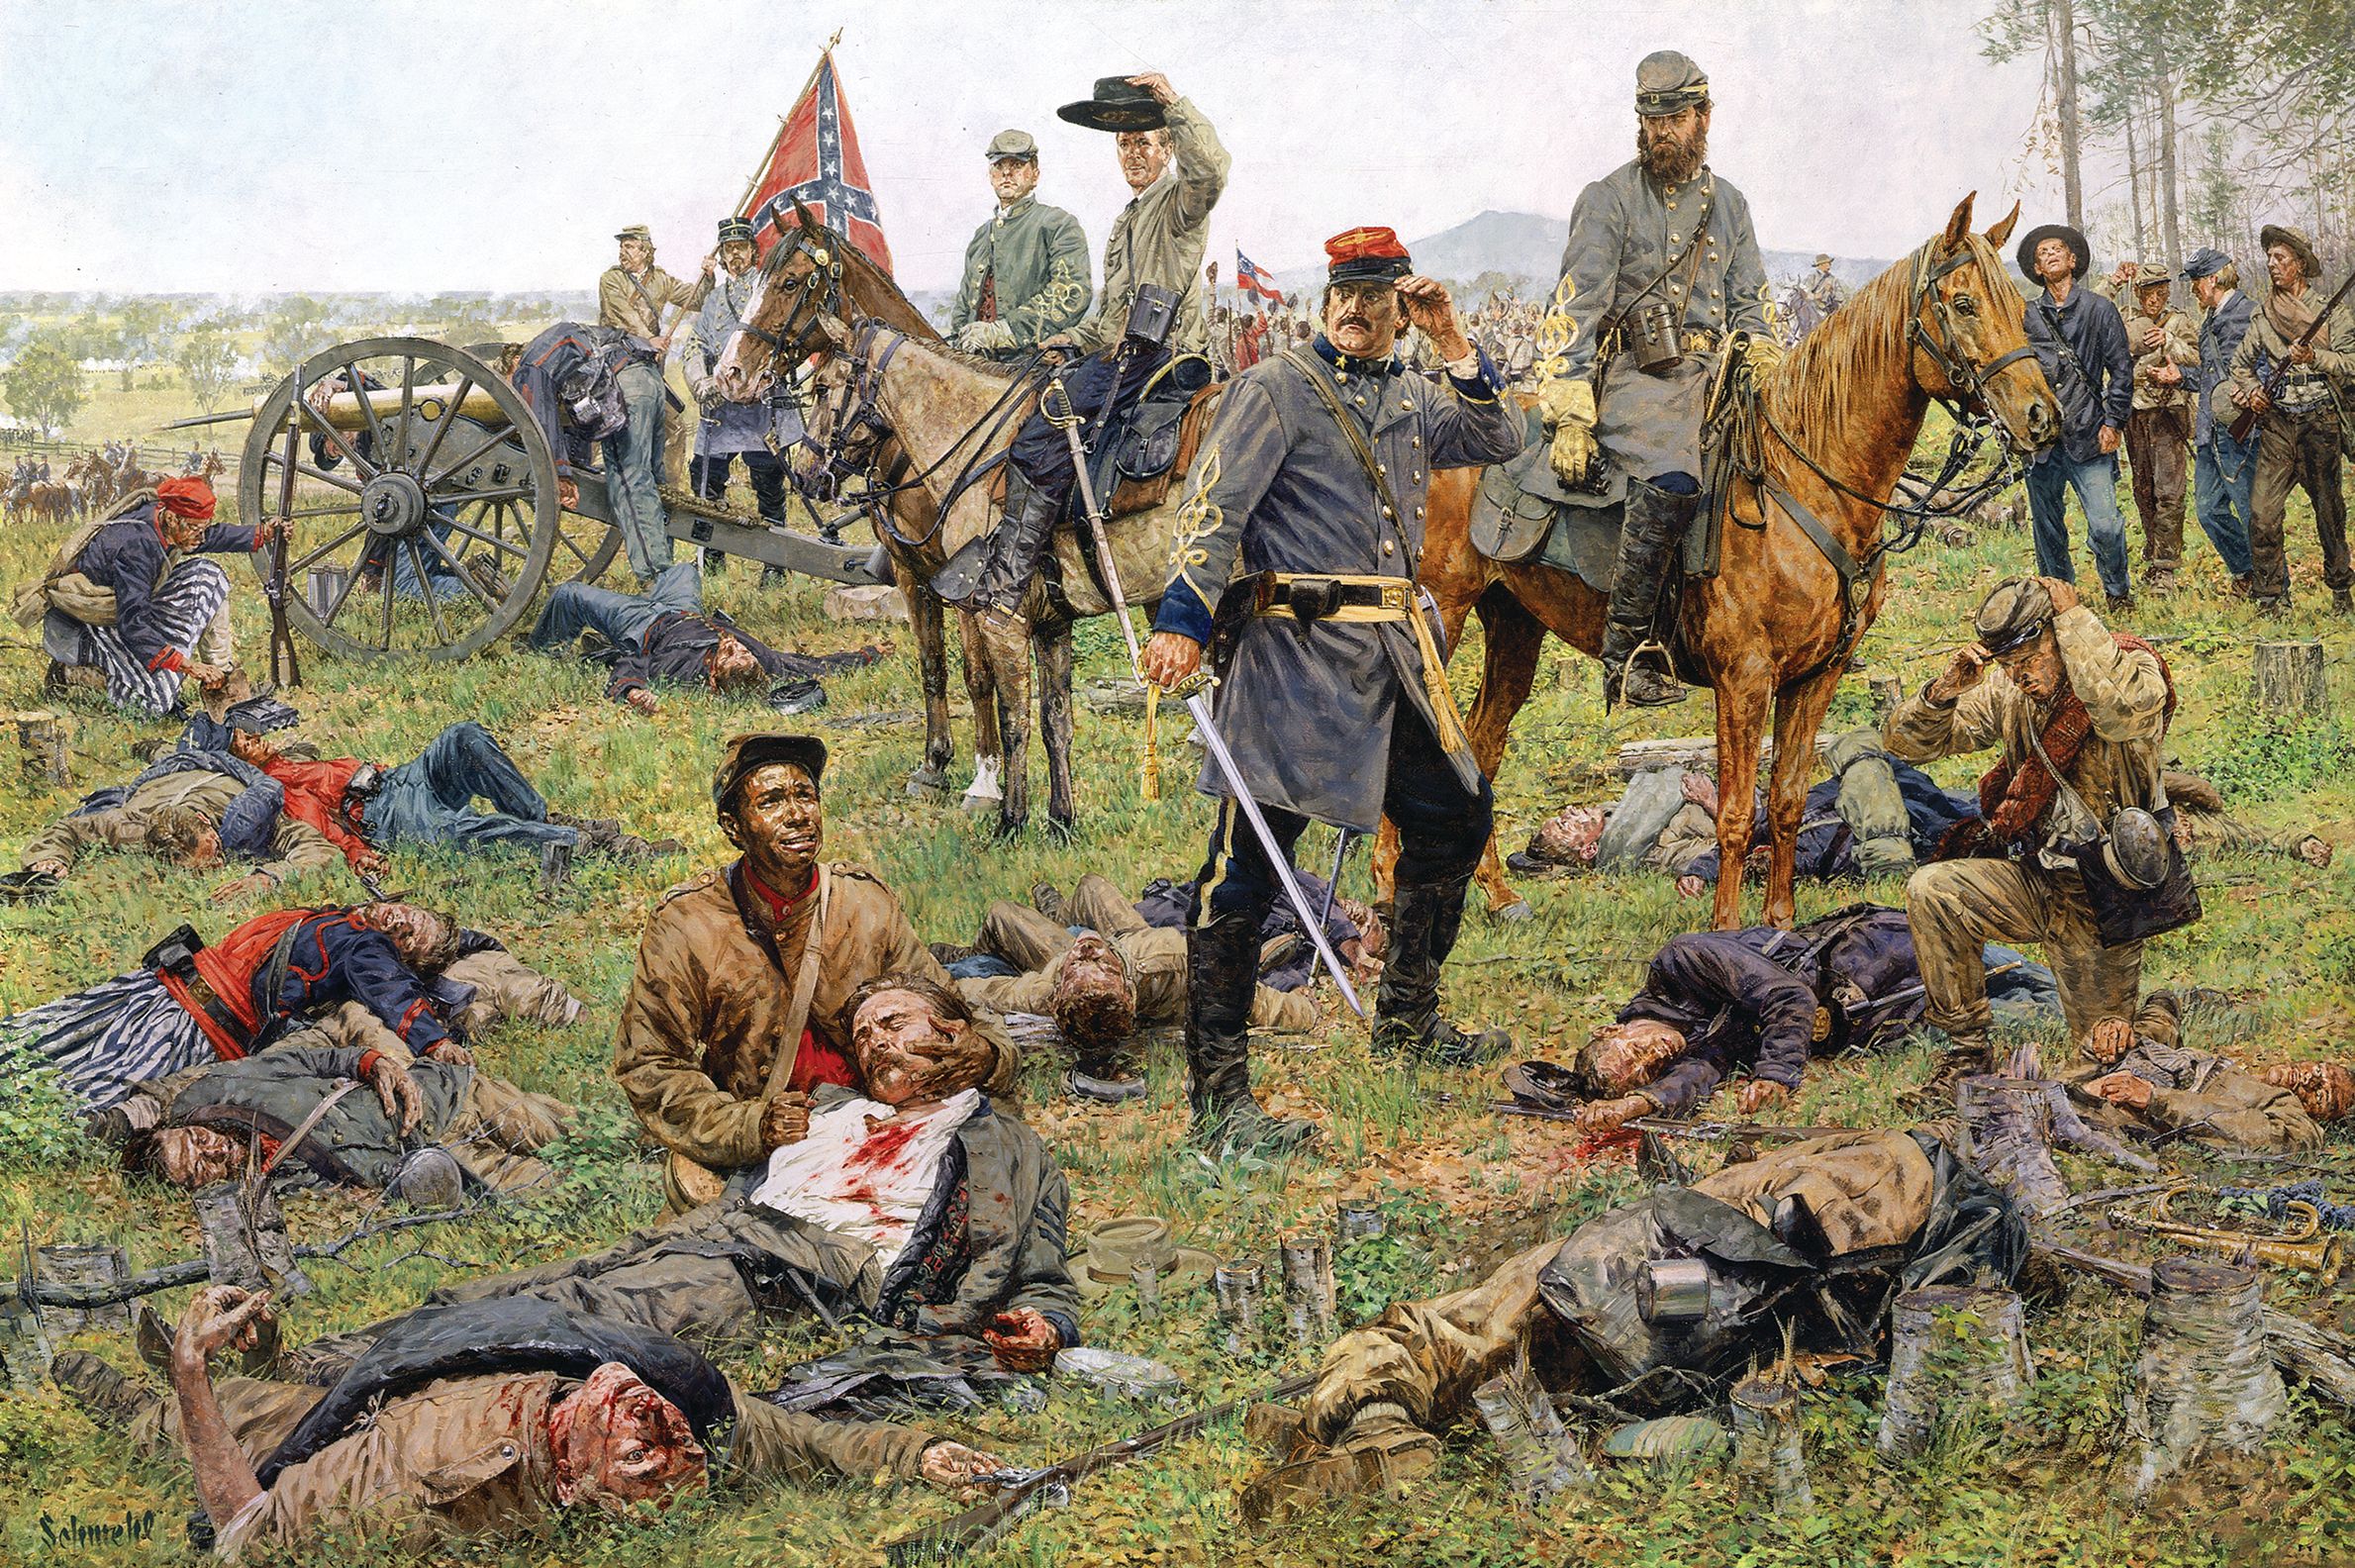 Confederate Major General Thomas J. “Stonewall” Jackson, on horseback, surveys the “Coaling” after the battle. Major Chatham Roberdeau Wheat, center, is surrounded by Louisiana Tiger casualities, including several in their colorful Zouave uniforms.